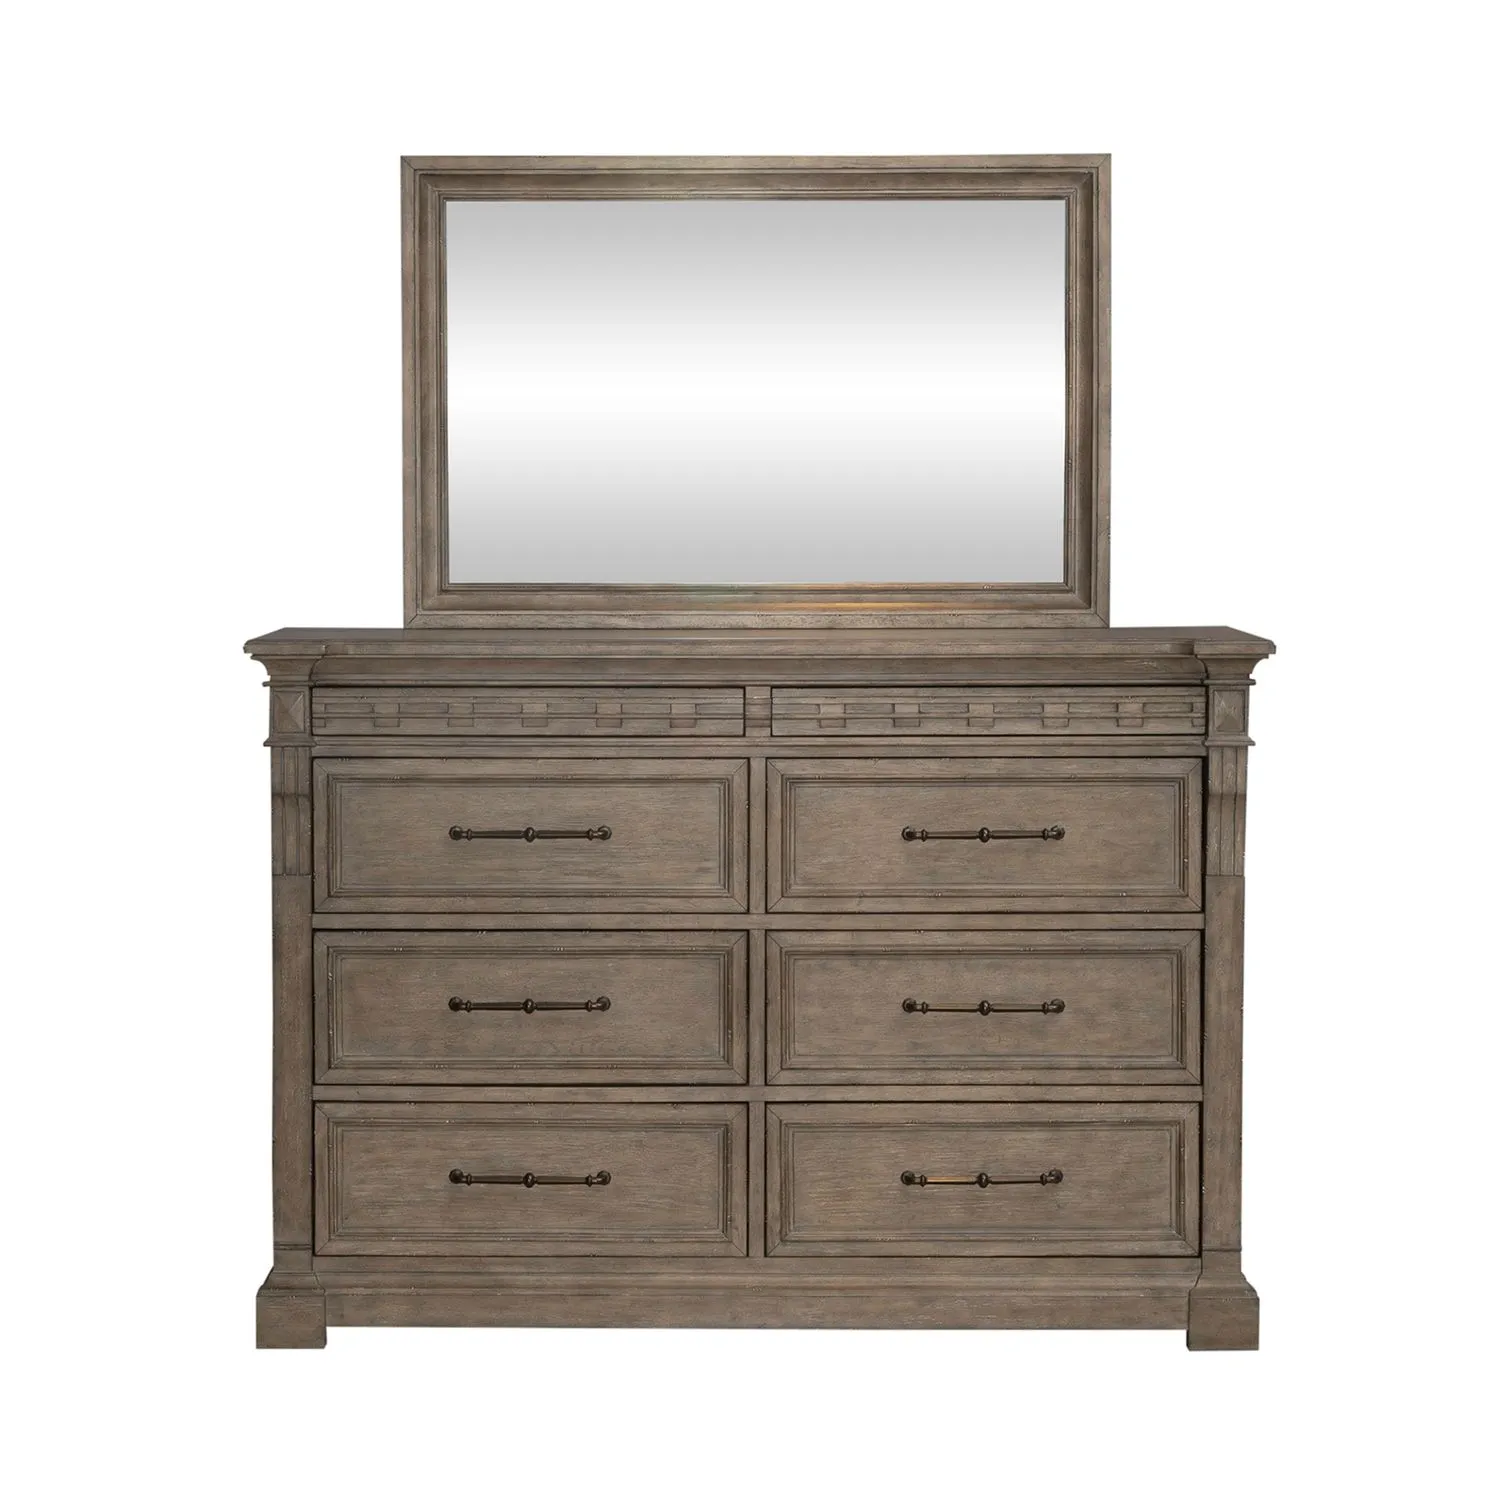 DRESSER AND MIRROR - TOWN AND COUNTRY